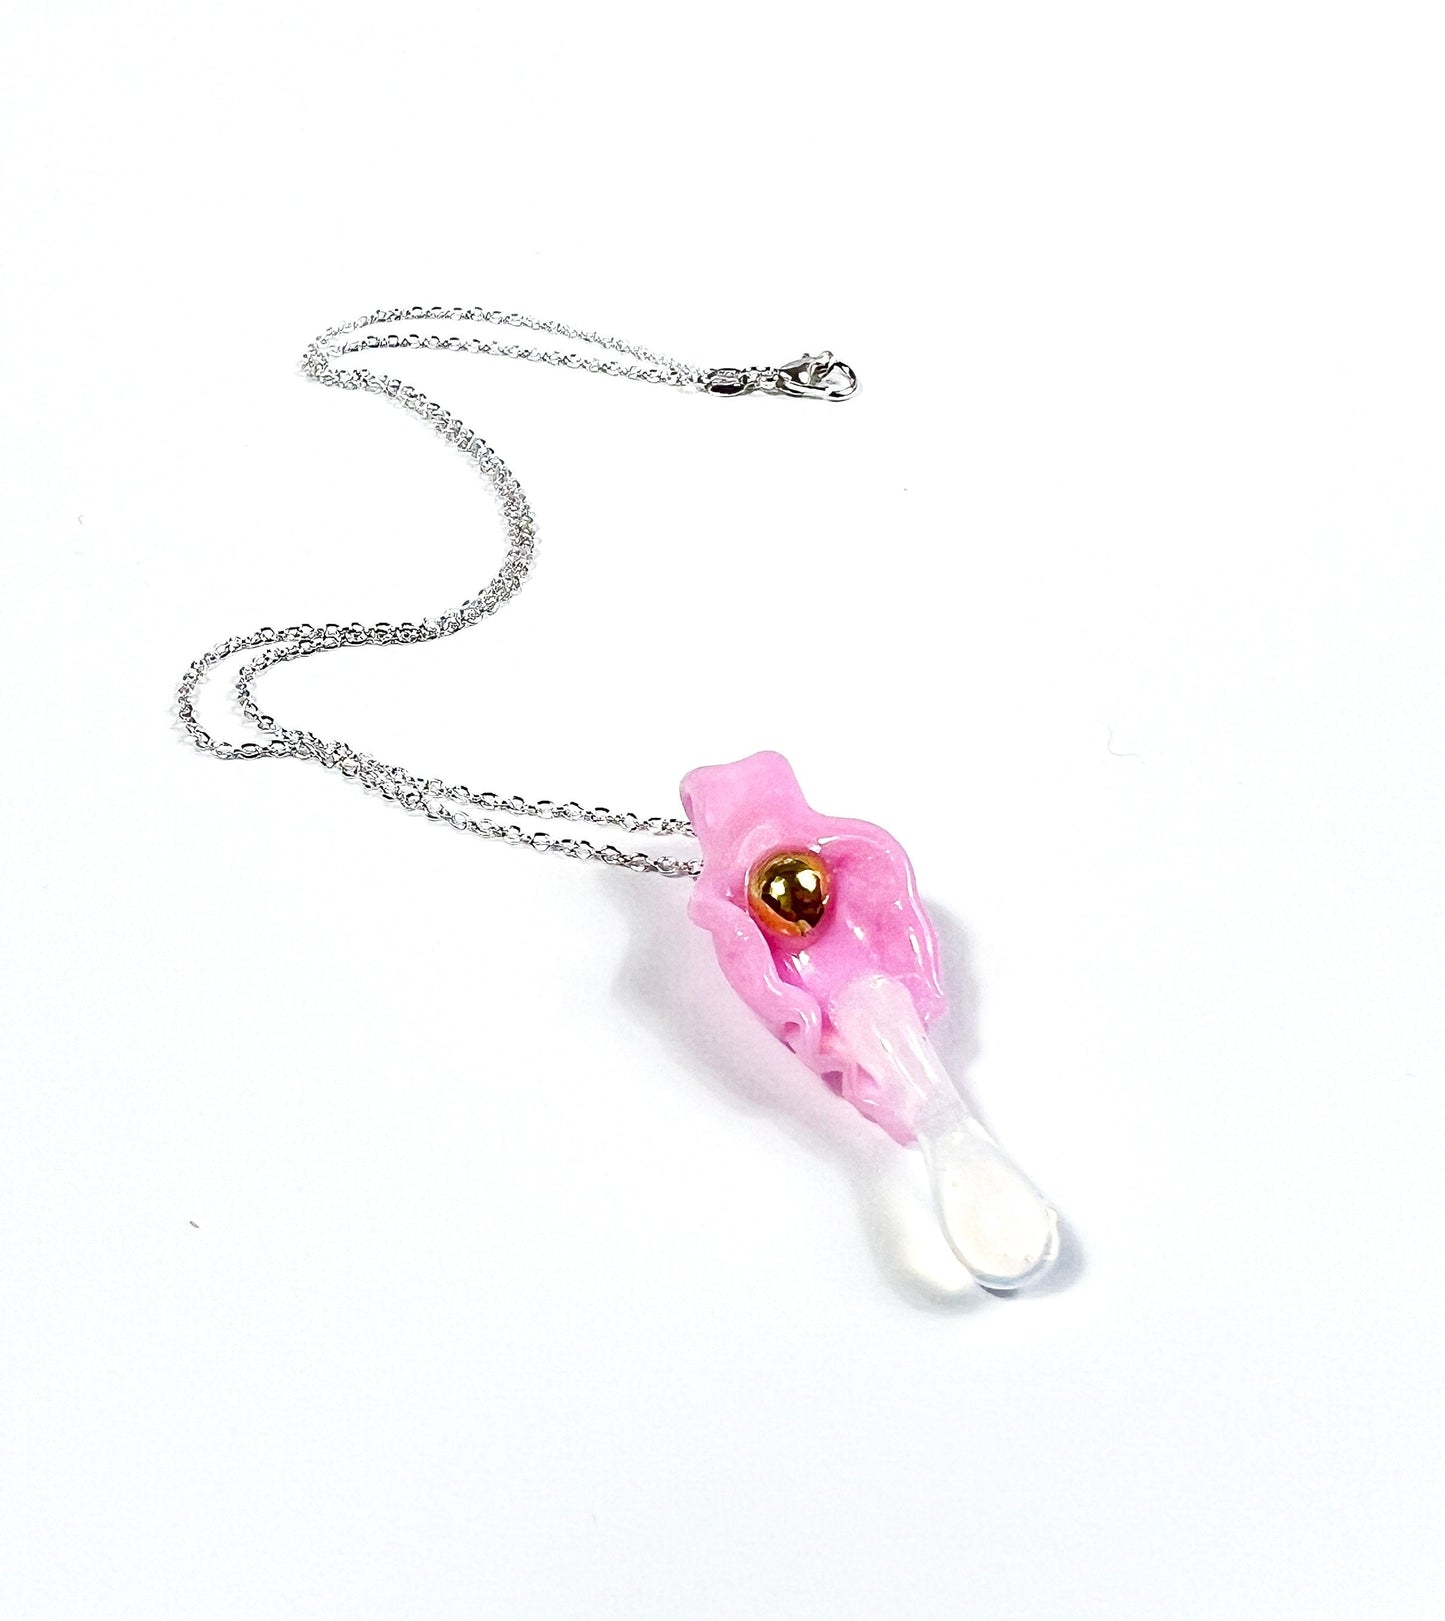 Hand Sculpted Glass - Vagina Pendant Necklace